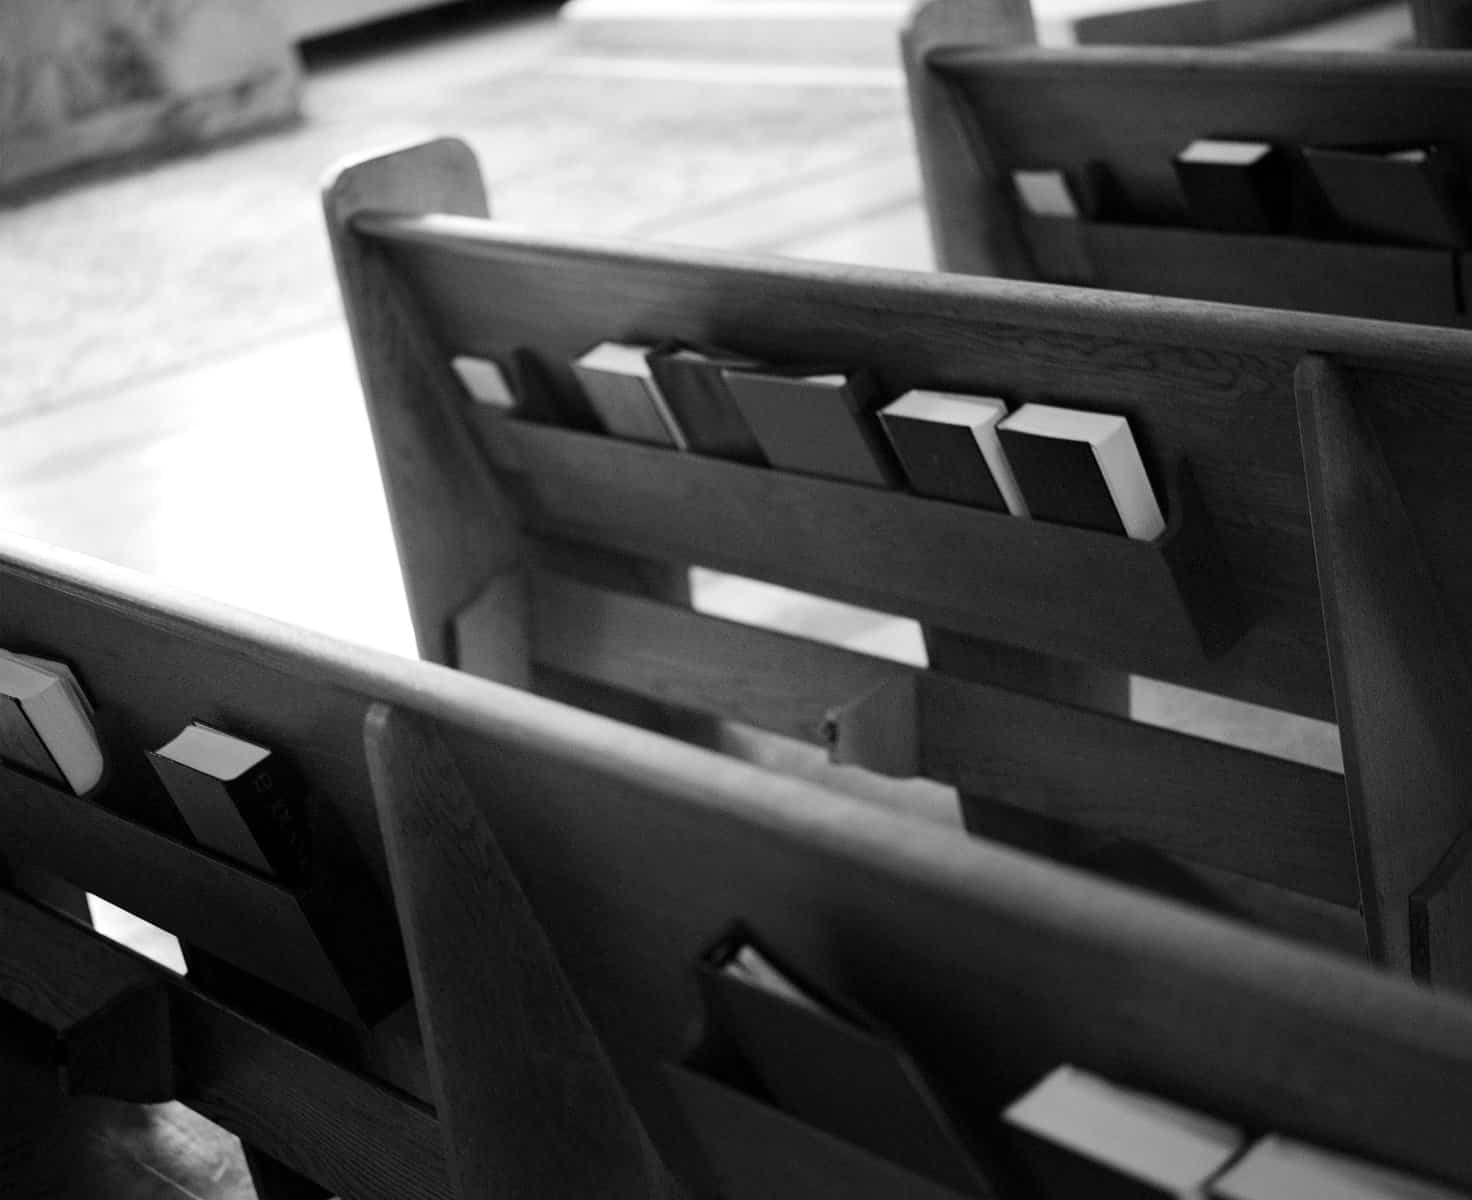 This black and white image shows church pews from the rear side with hymnals and bibles tucked in the back.